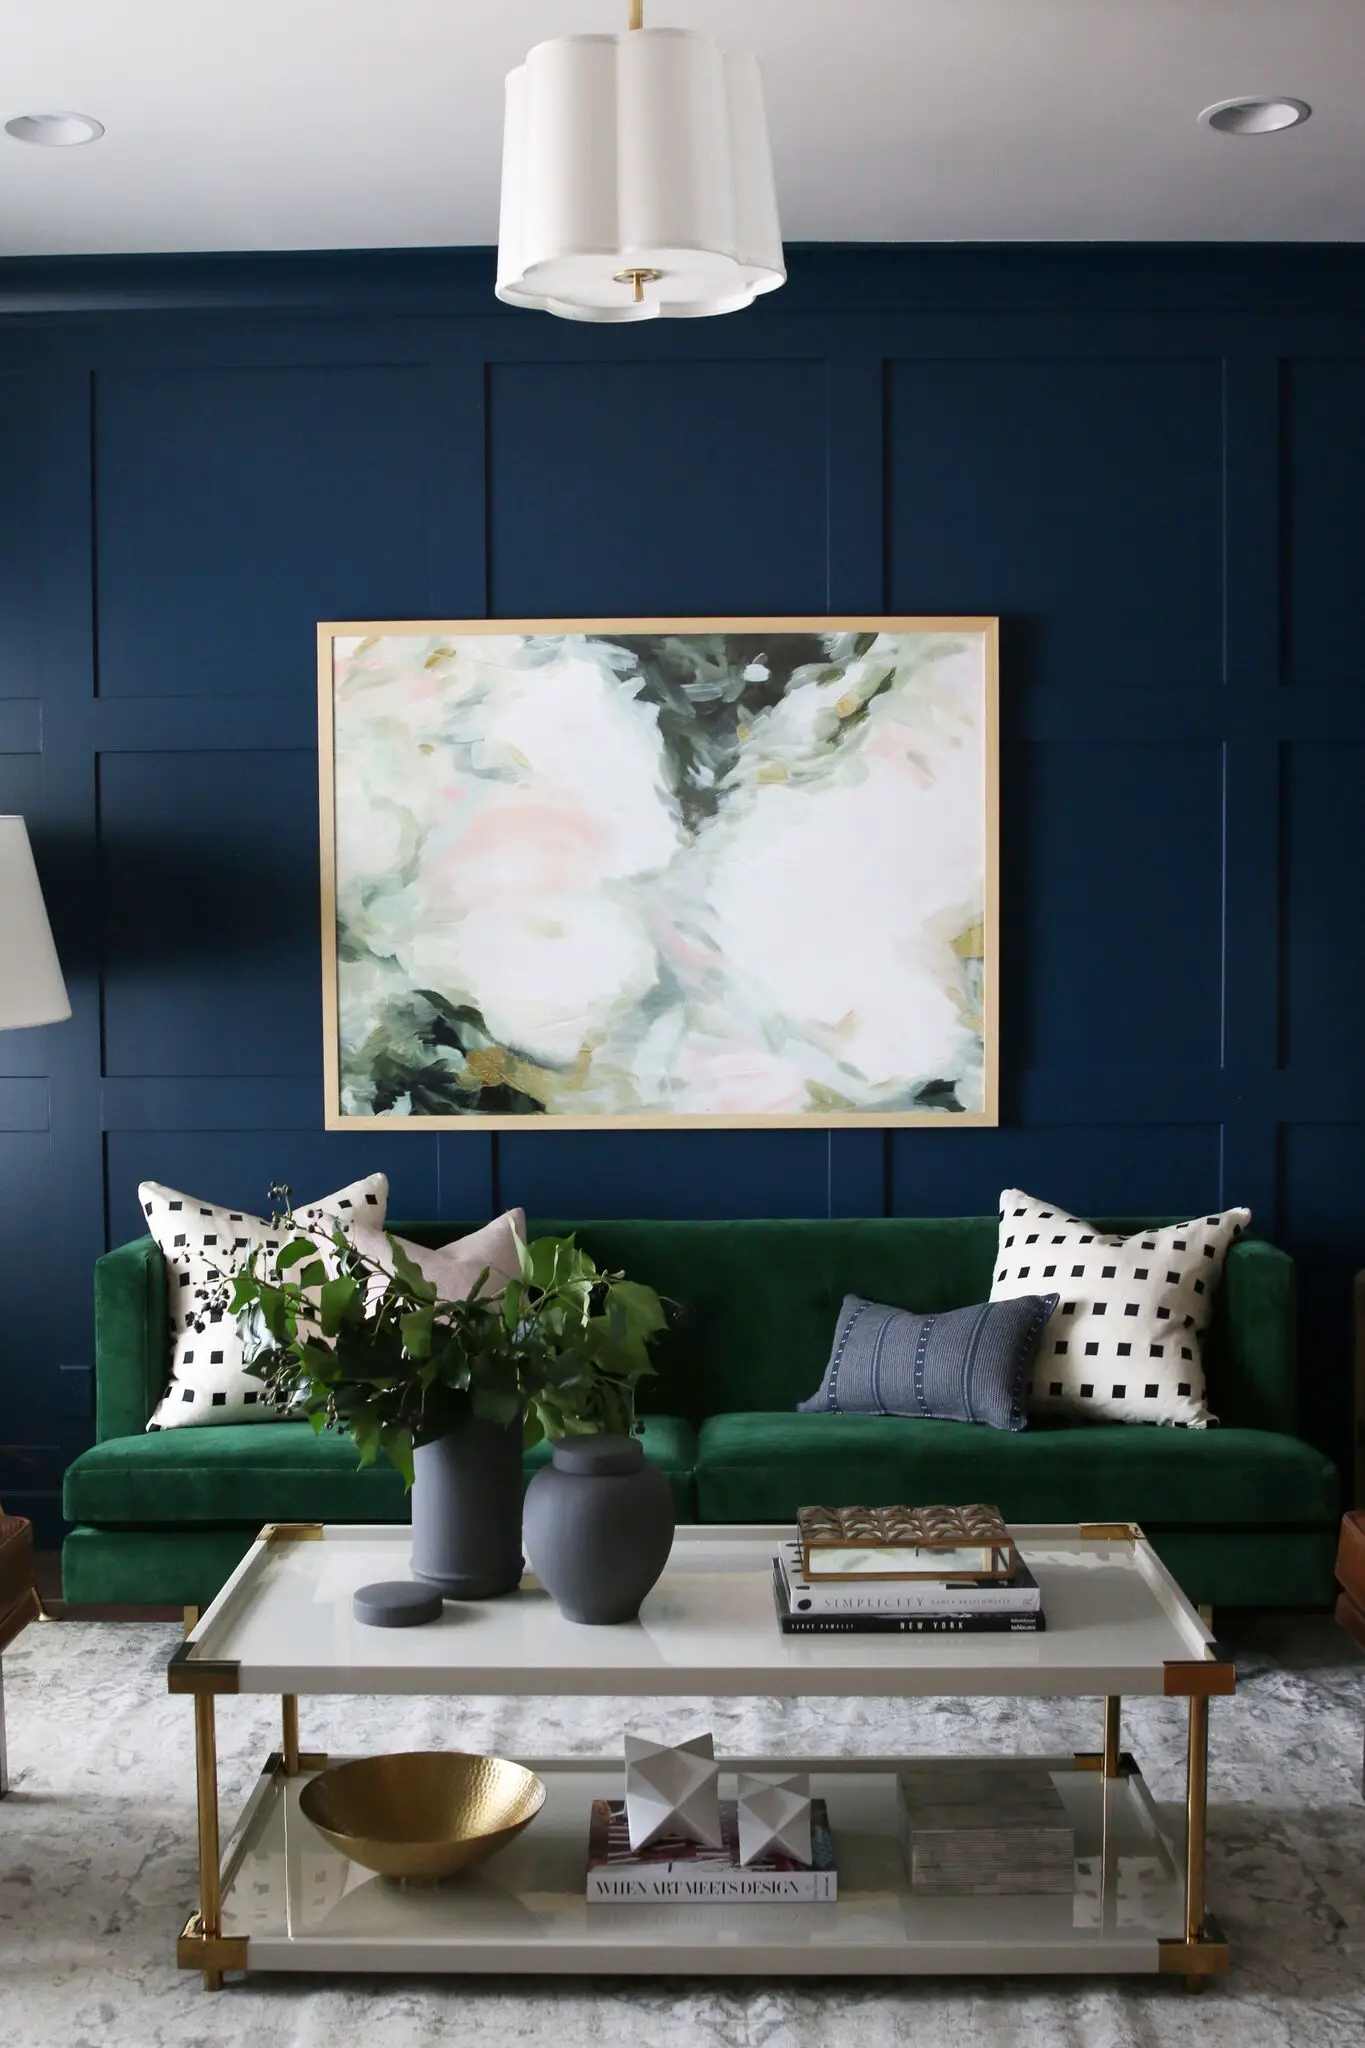 Dark blue modern paneling - inspiration for our guest house - That Homebird Life Blog